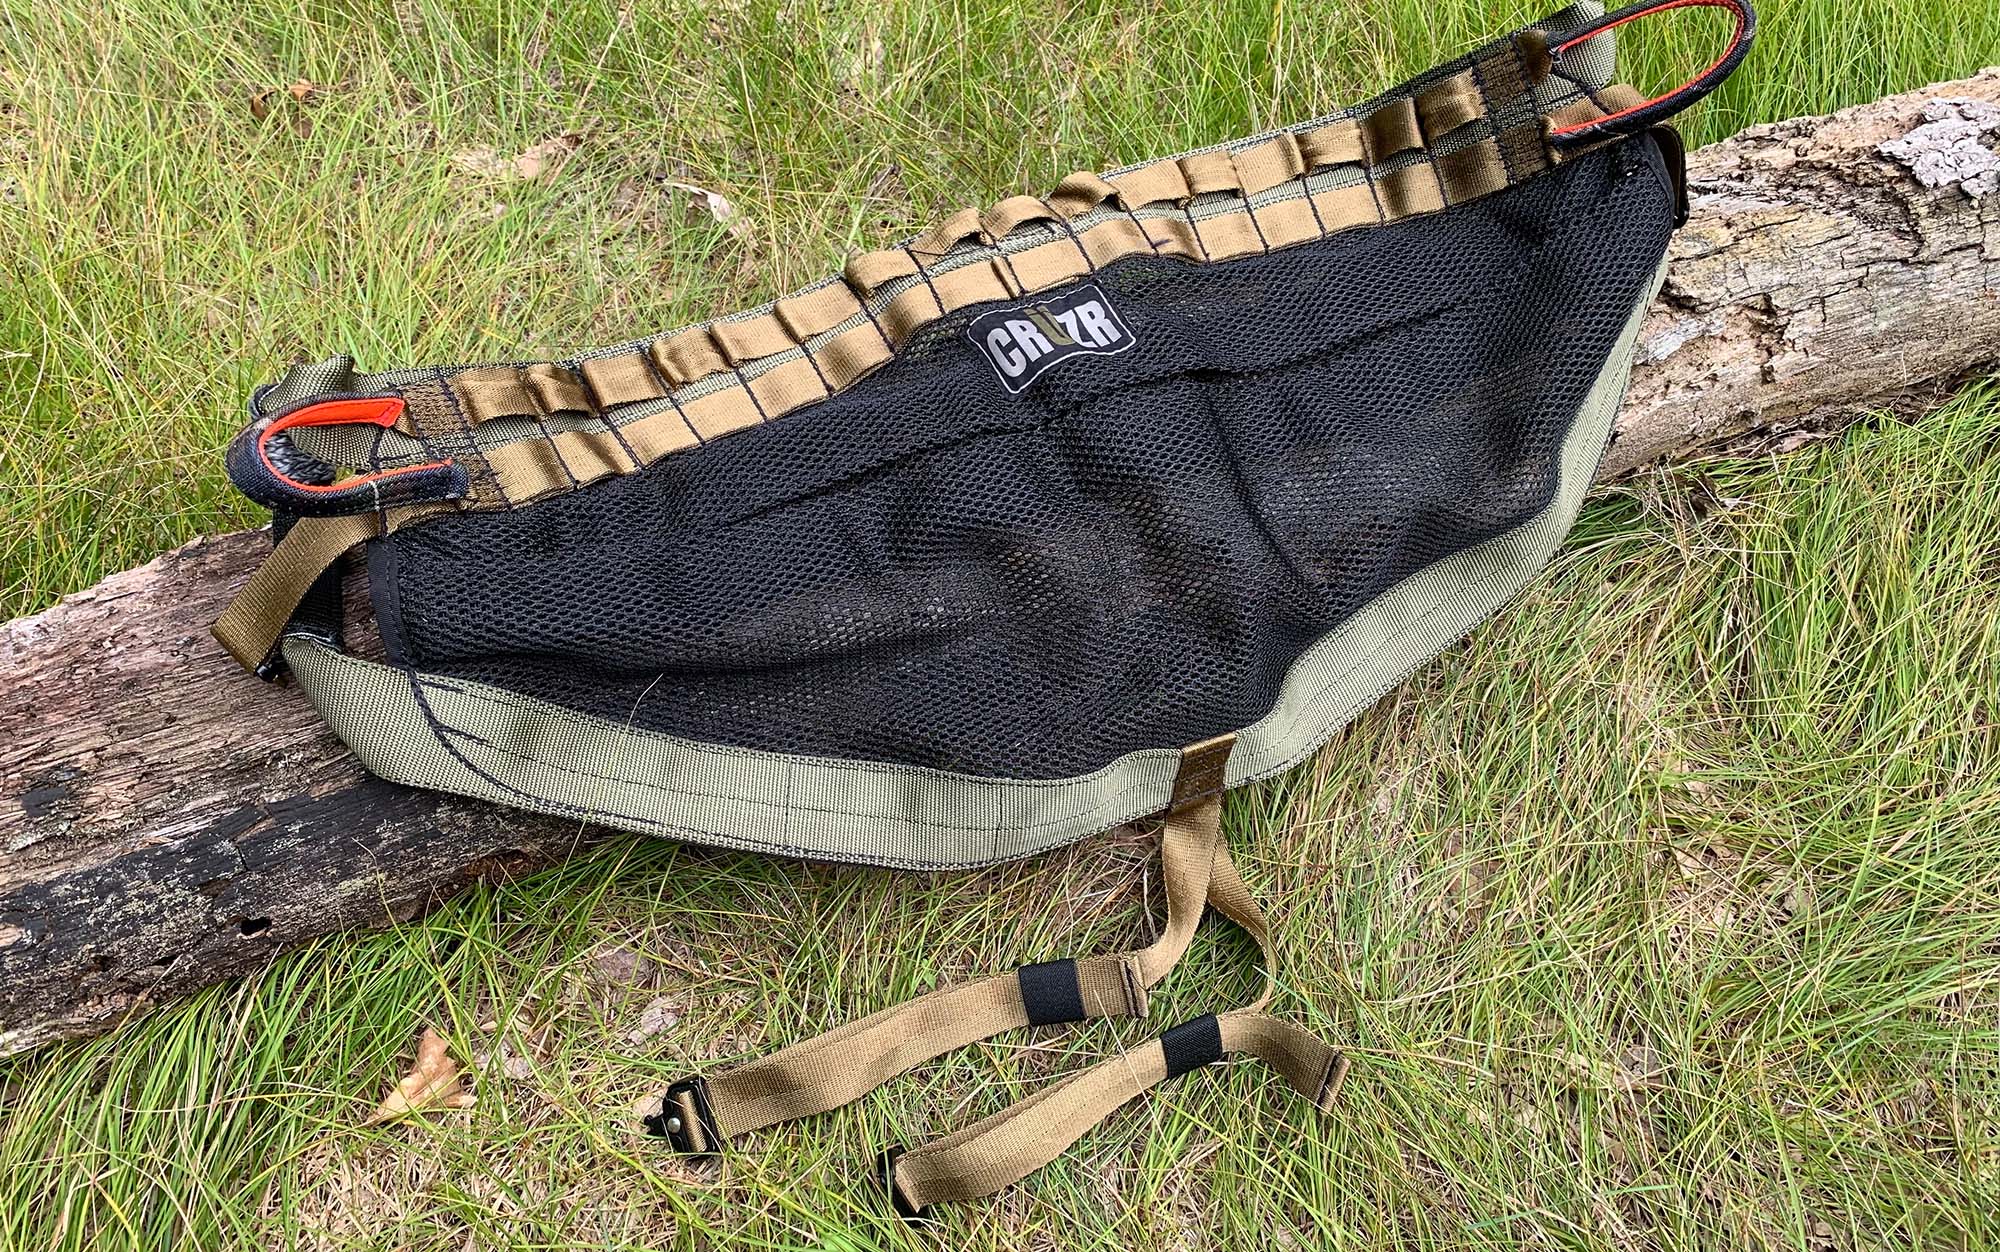 The CRUZR XC uses quick release buckles on the leg straps.